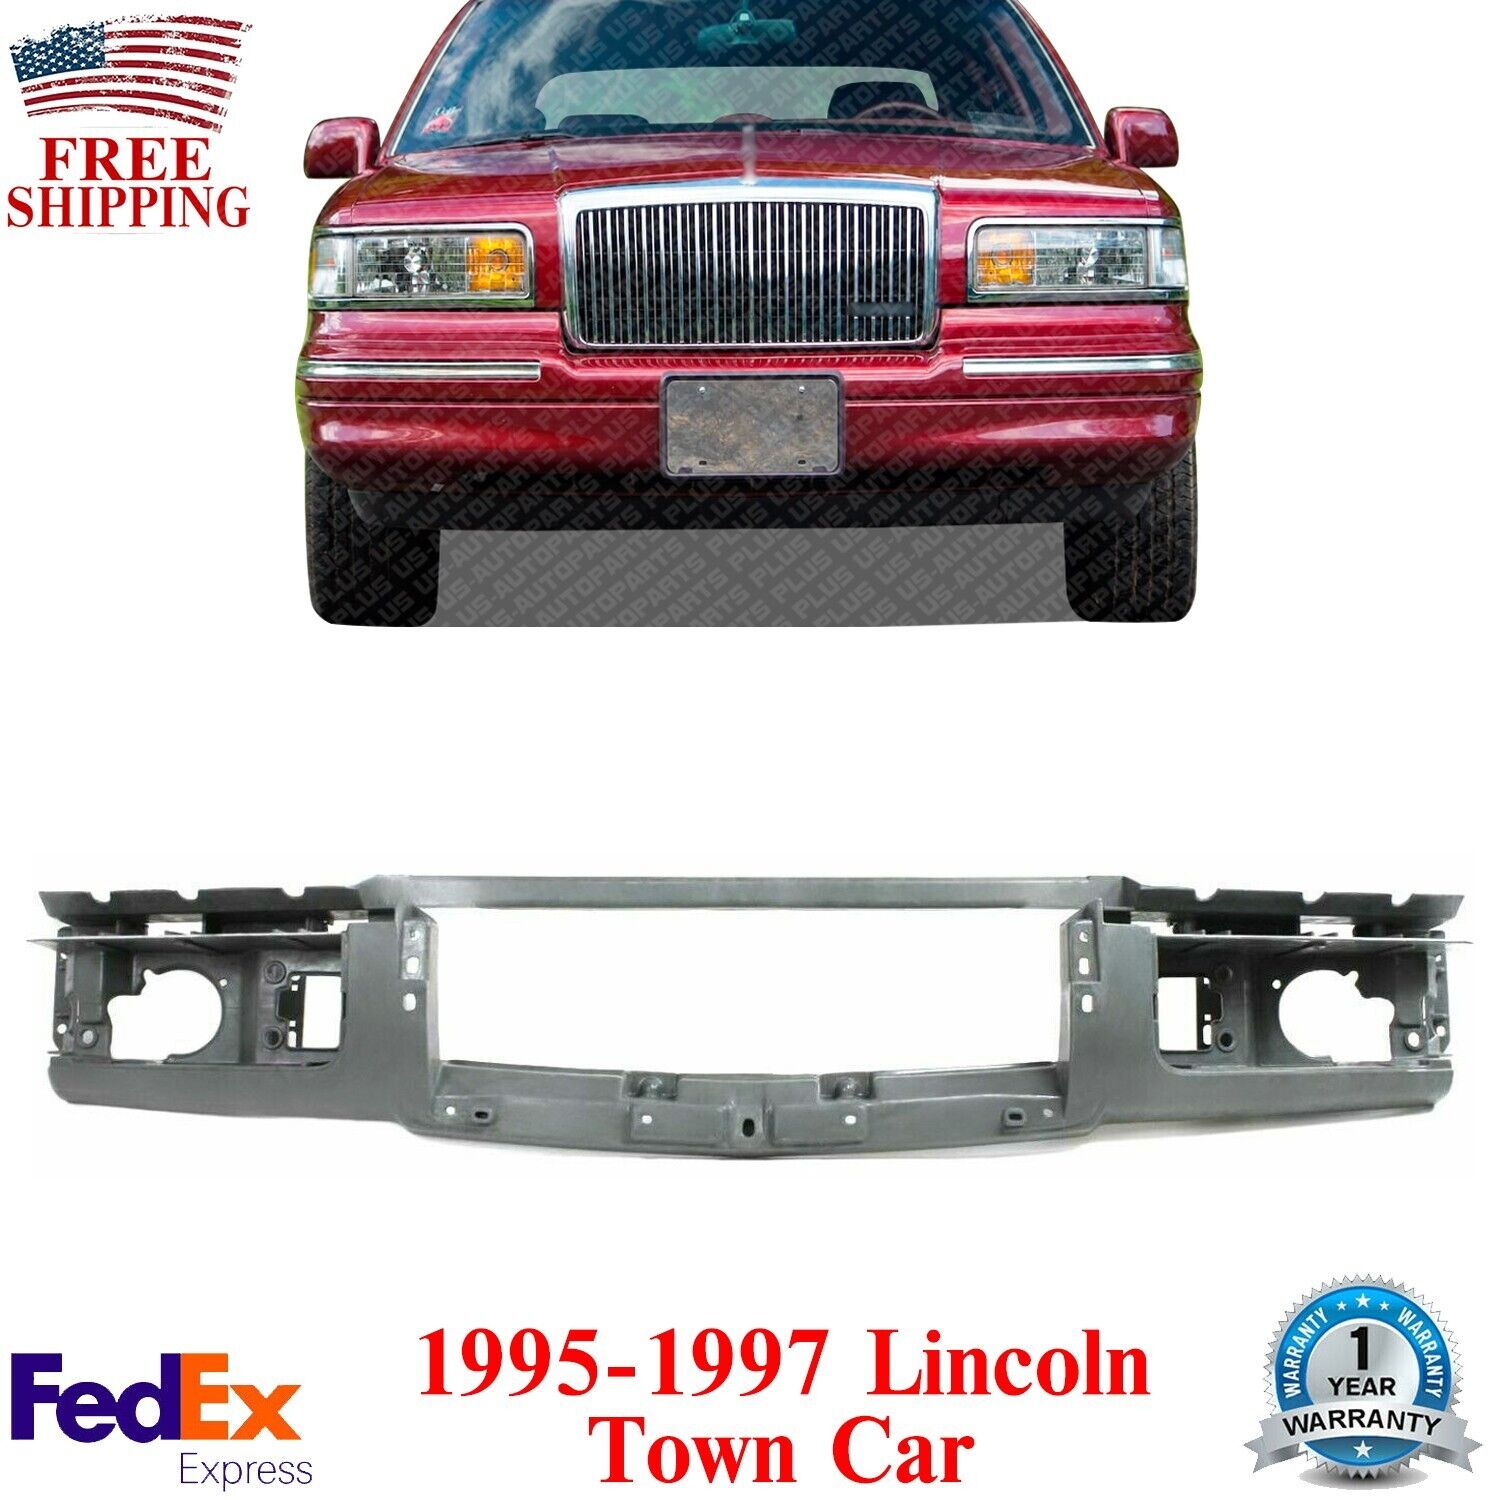 Front Header Panel Thermoplastic and Fiberglass For 1995-1997 Lincoln Town Car